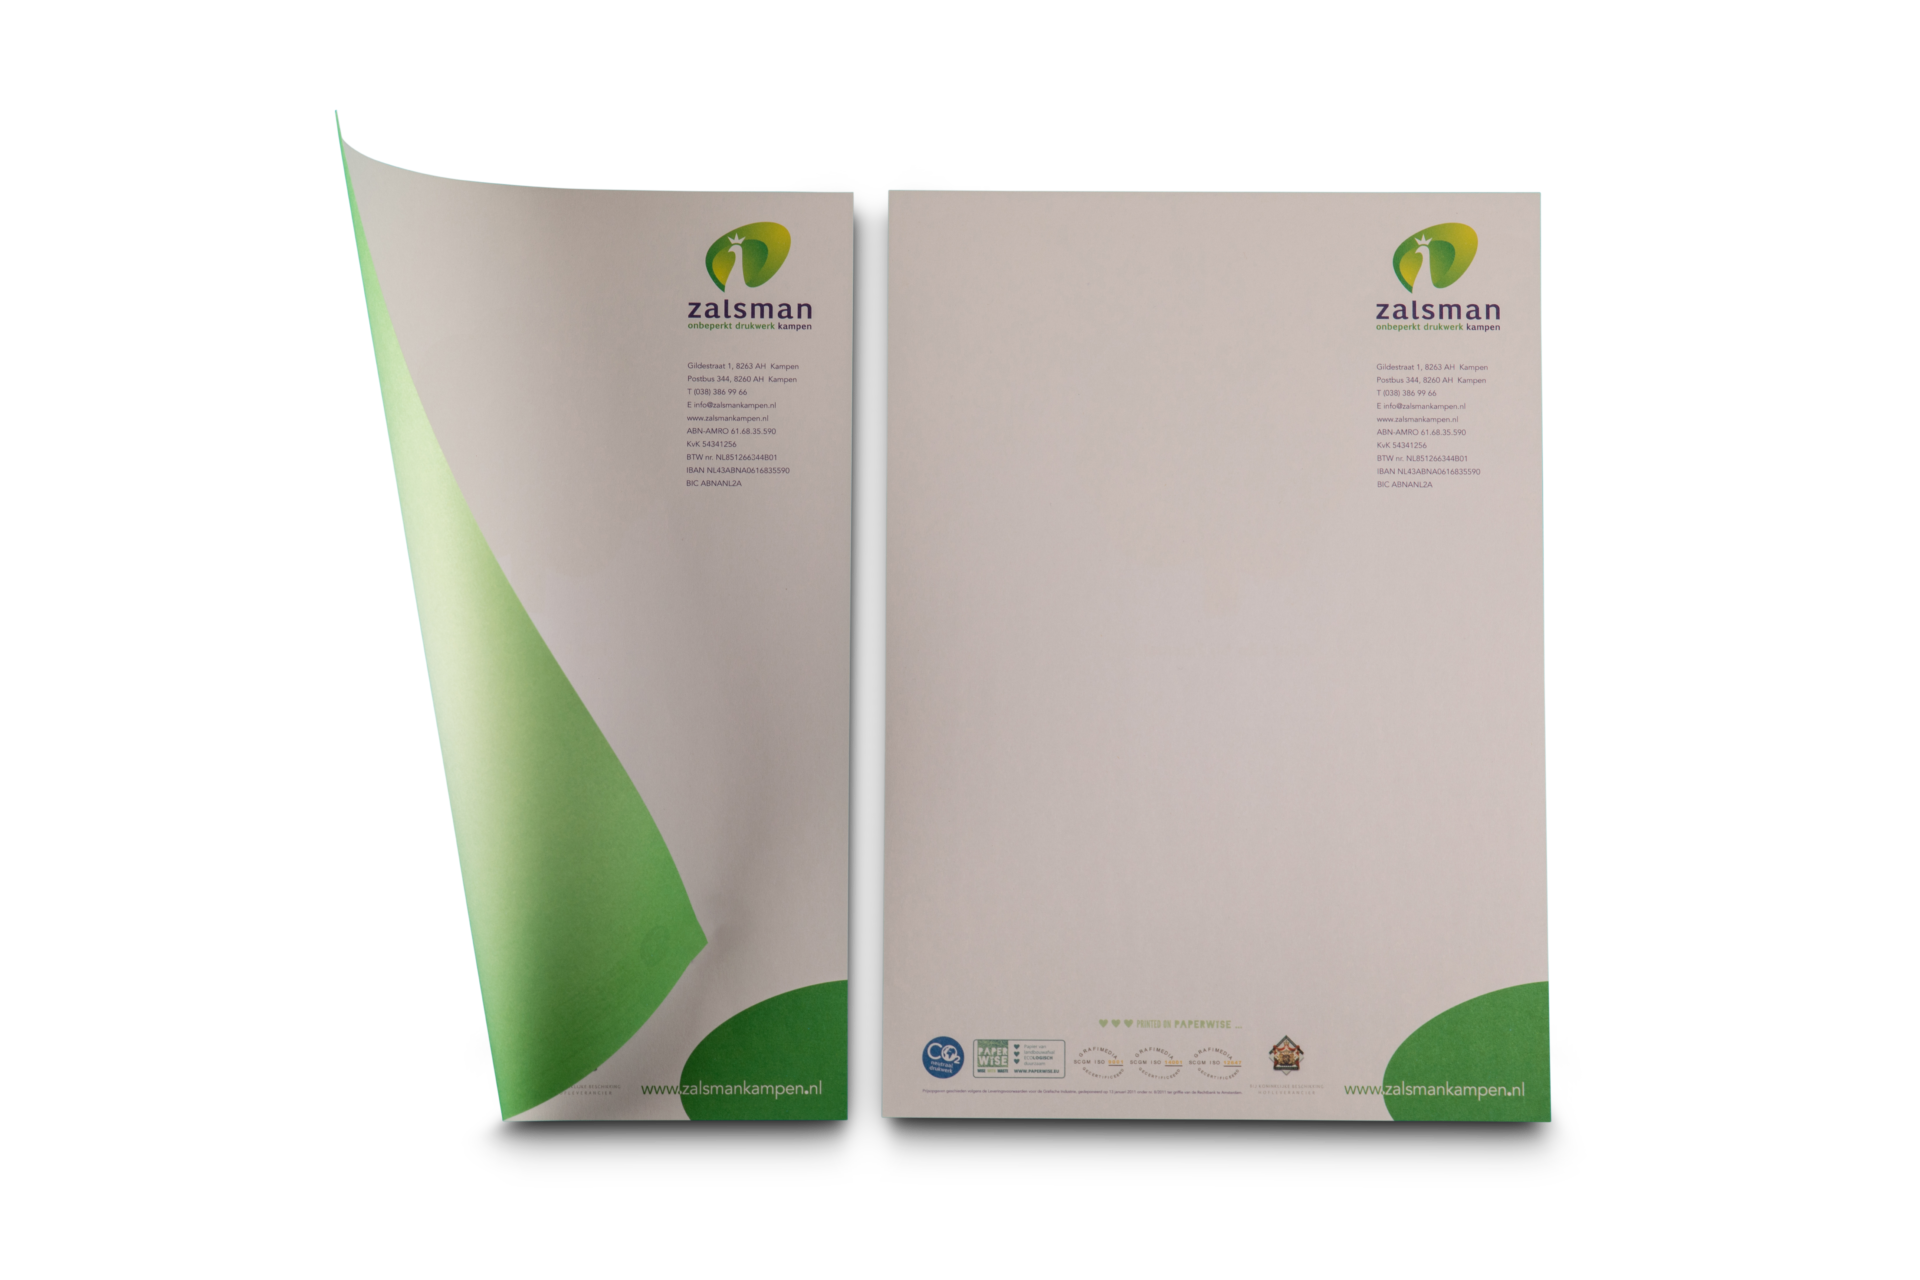 wp content uploads  0    0  sustainable paper board eco writing paper office zalsman 9c